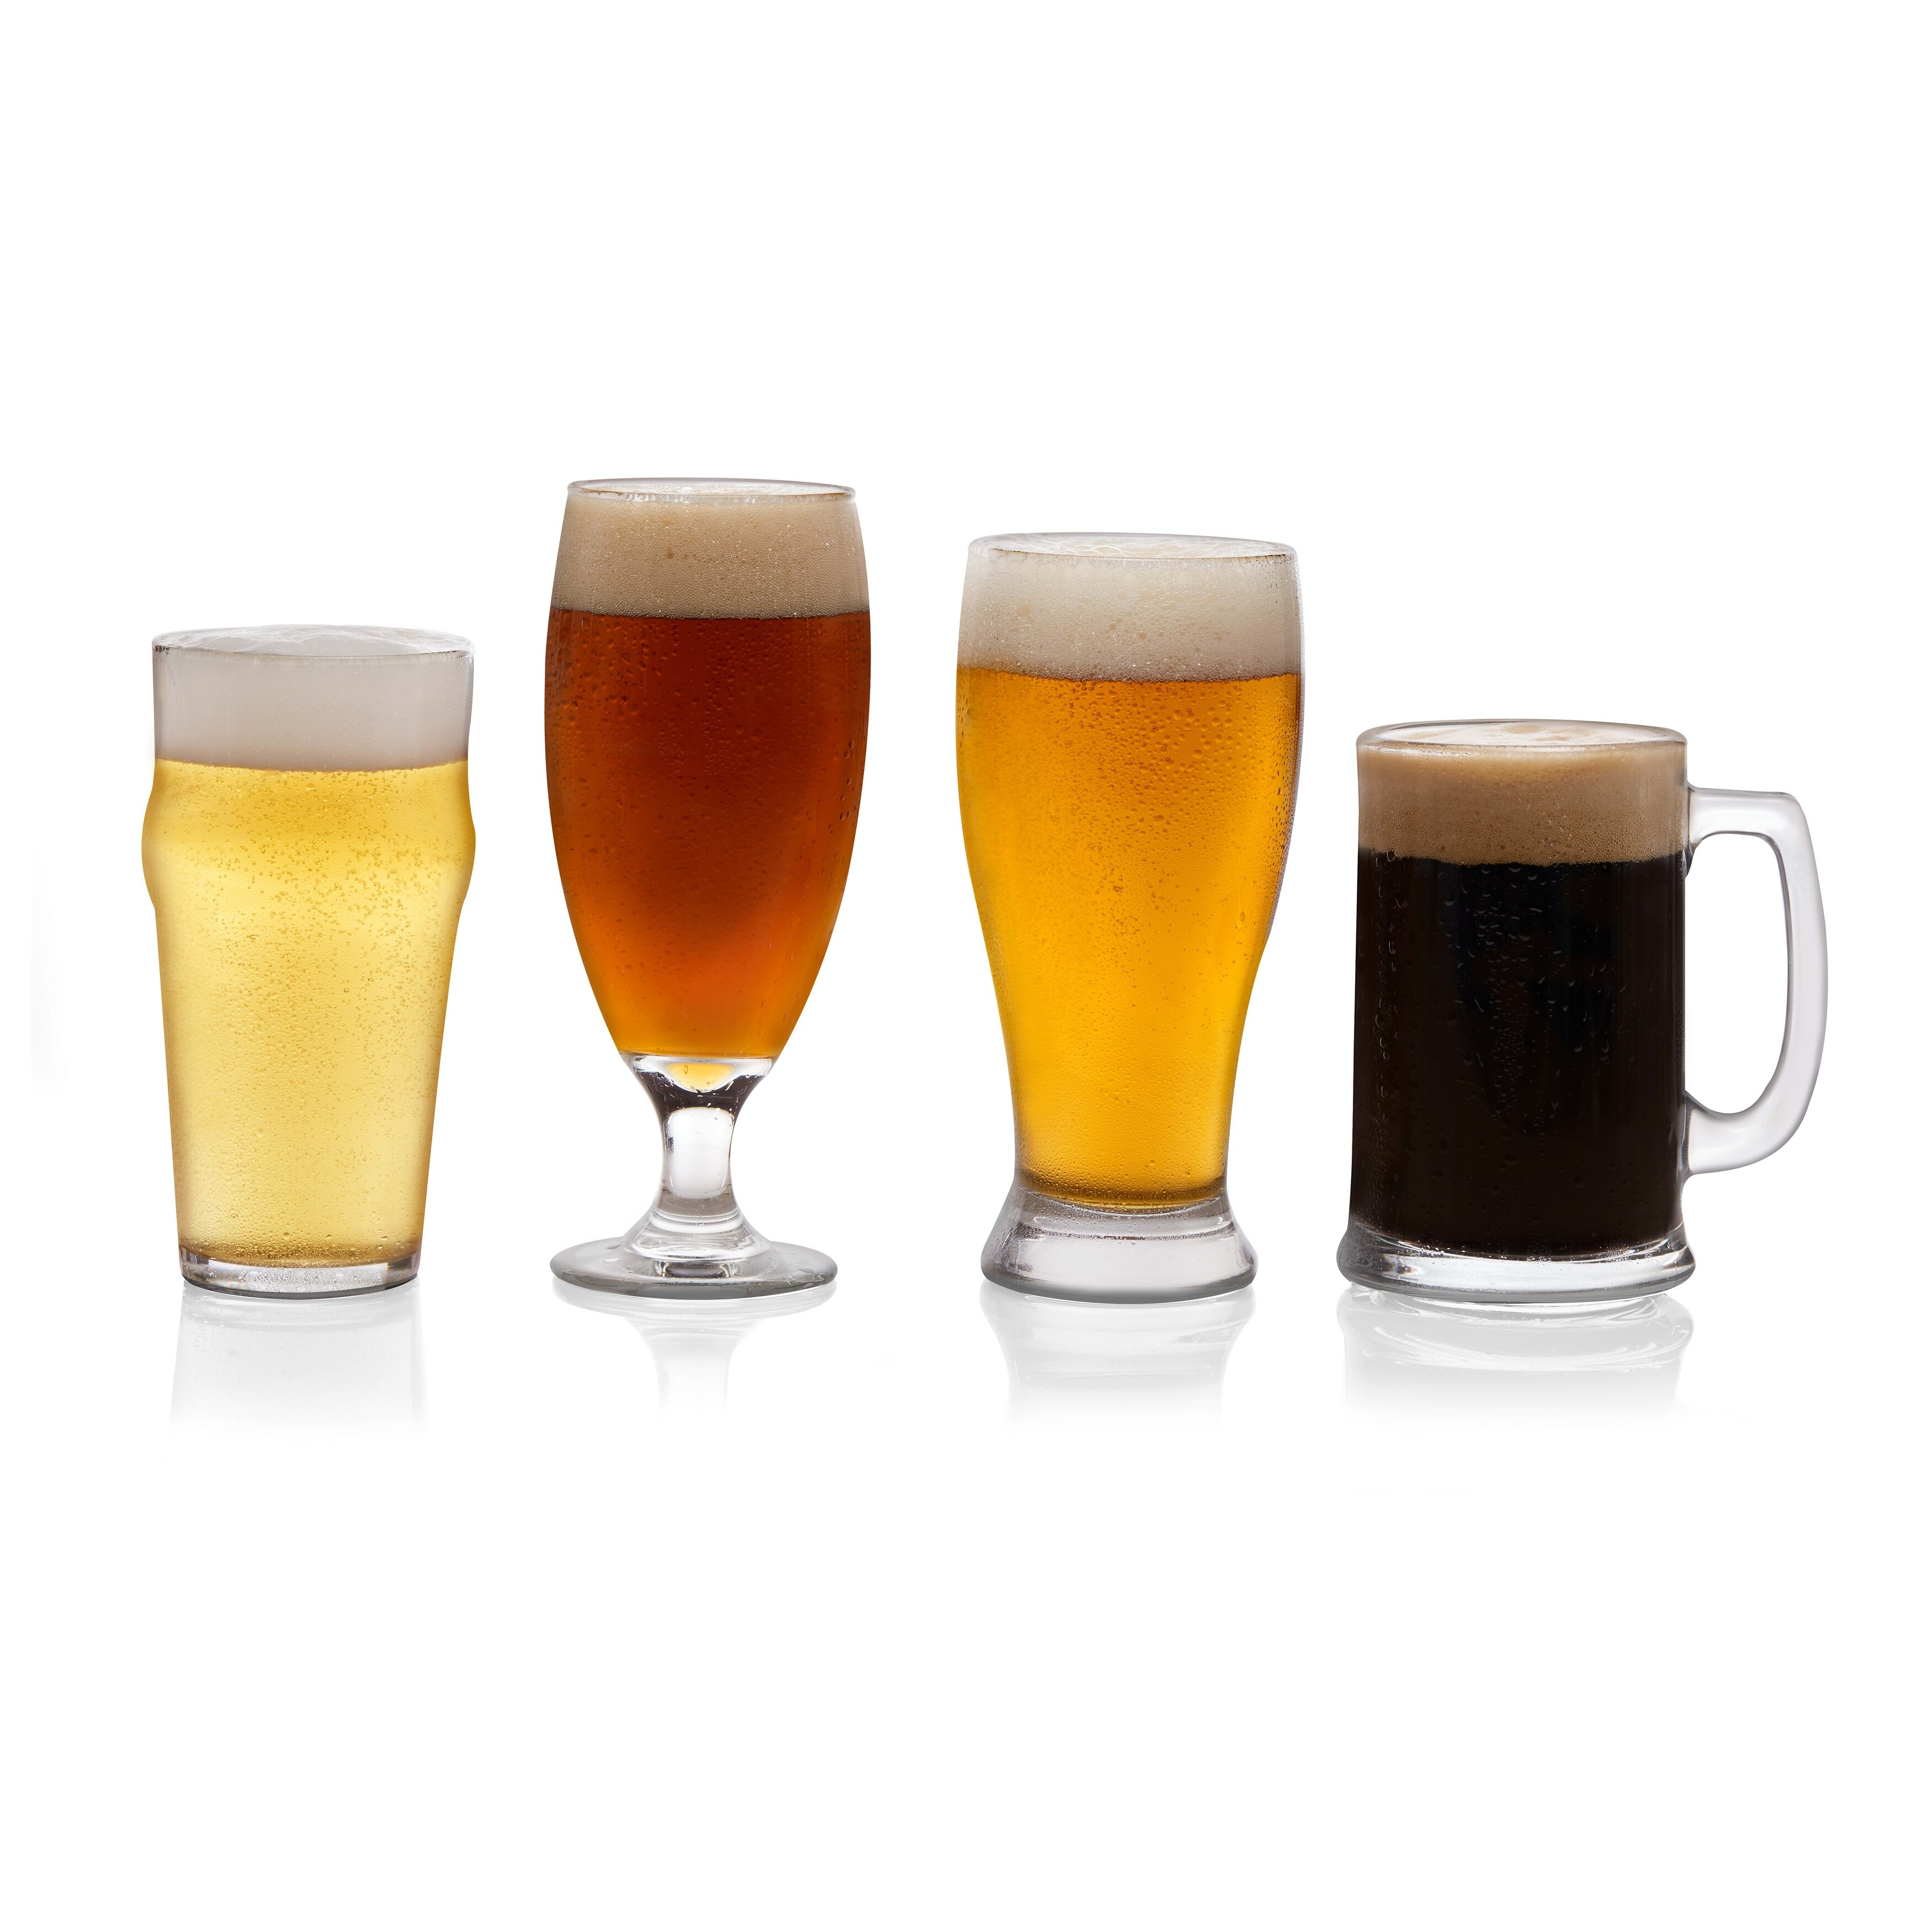 https://ak1.ostkcdn.com/images/products/is/images/direct/ba59e3e0928ded50d49a4904bb2ca6fcc52edd53/Libbey-Craft-Brews-Assorted-Beer-Glasses%2C-Set-of-4.jpg